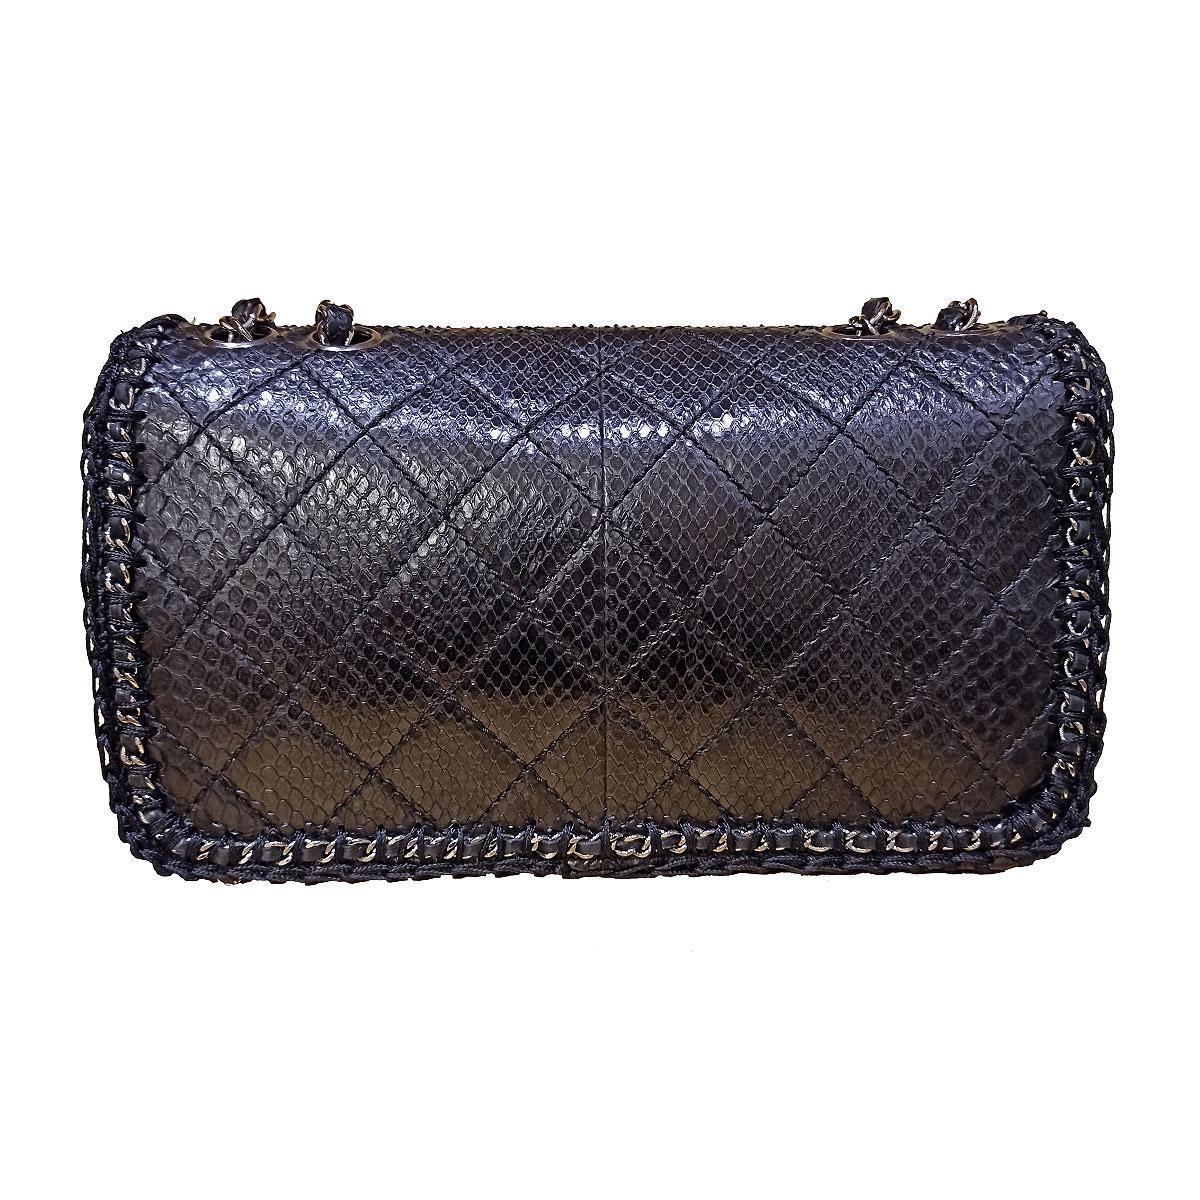 Fantastic and iconic Chanel bag 
Year 2006/2008
Real python leather
Black color
Silver hardware
Worked wool sides
Internal pocket and phone holder
No card
Serial number inside
Cm 26 x 15 x 8 (10.2 x 5.9 x 3.14 inches)
With dustbag and box
Perfect